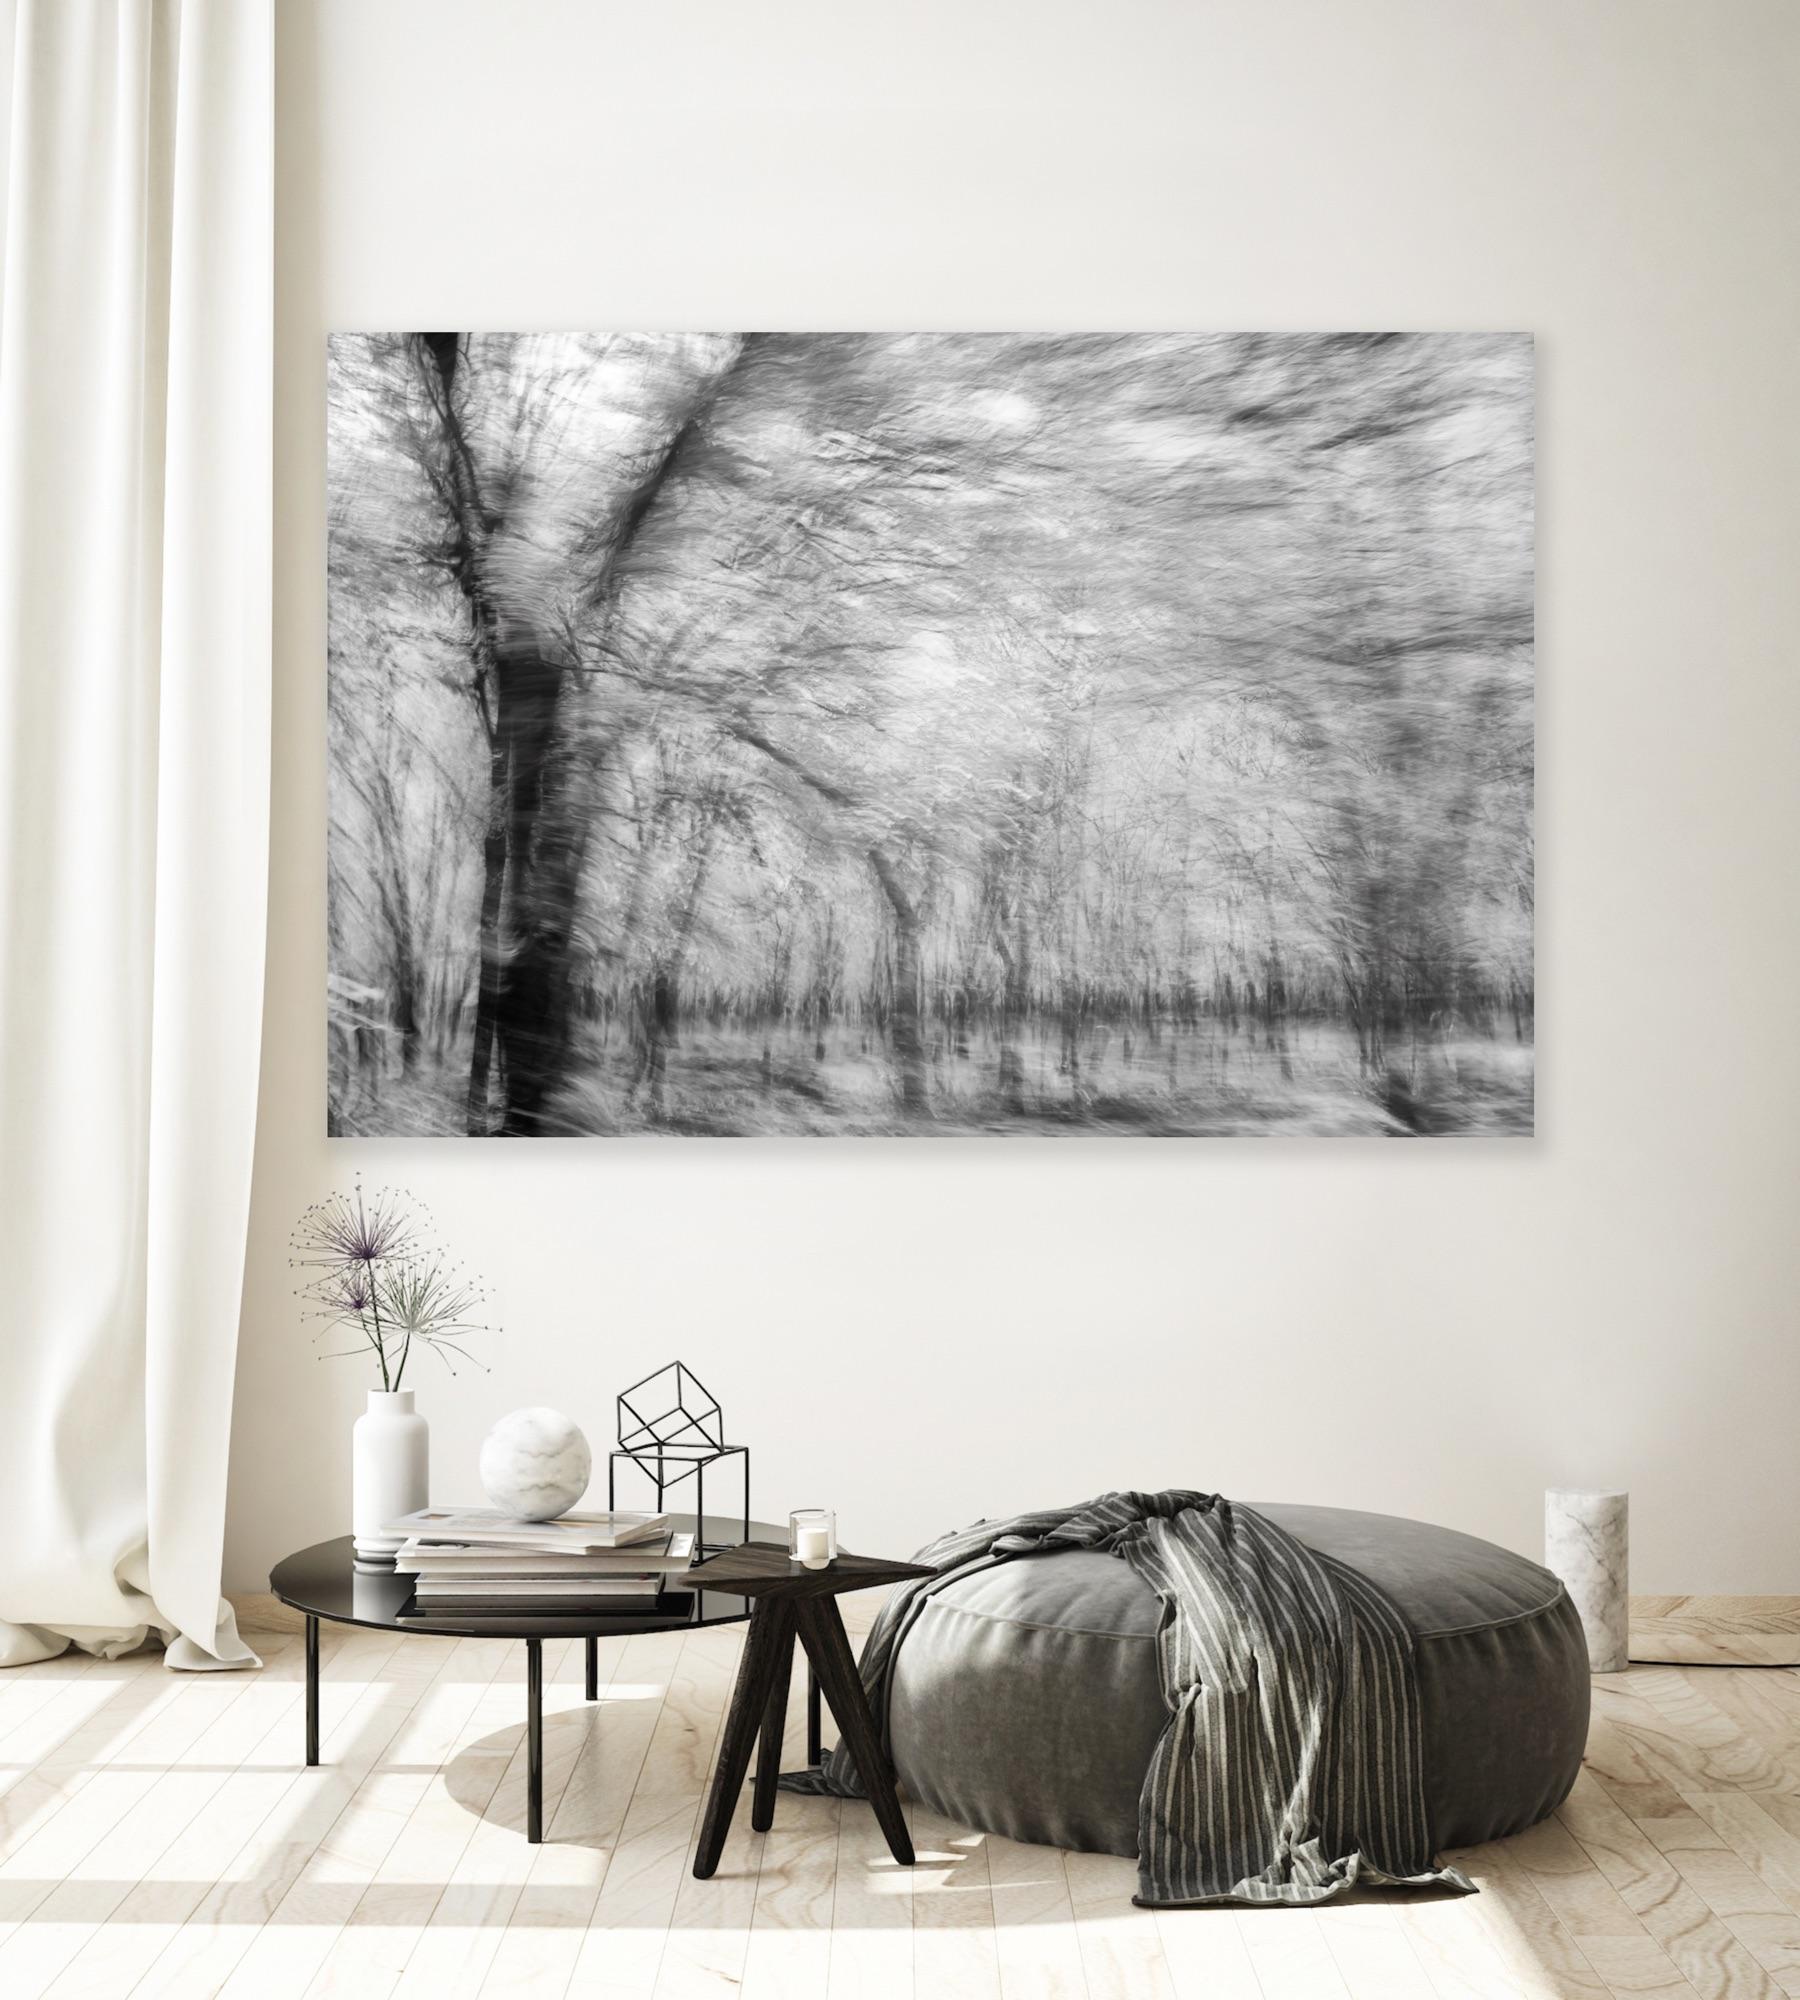  Landscape Photograph Nature Large Abstract Trees Wildlife India Black White For Sale 5